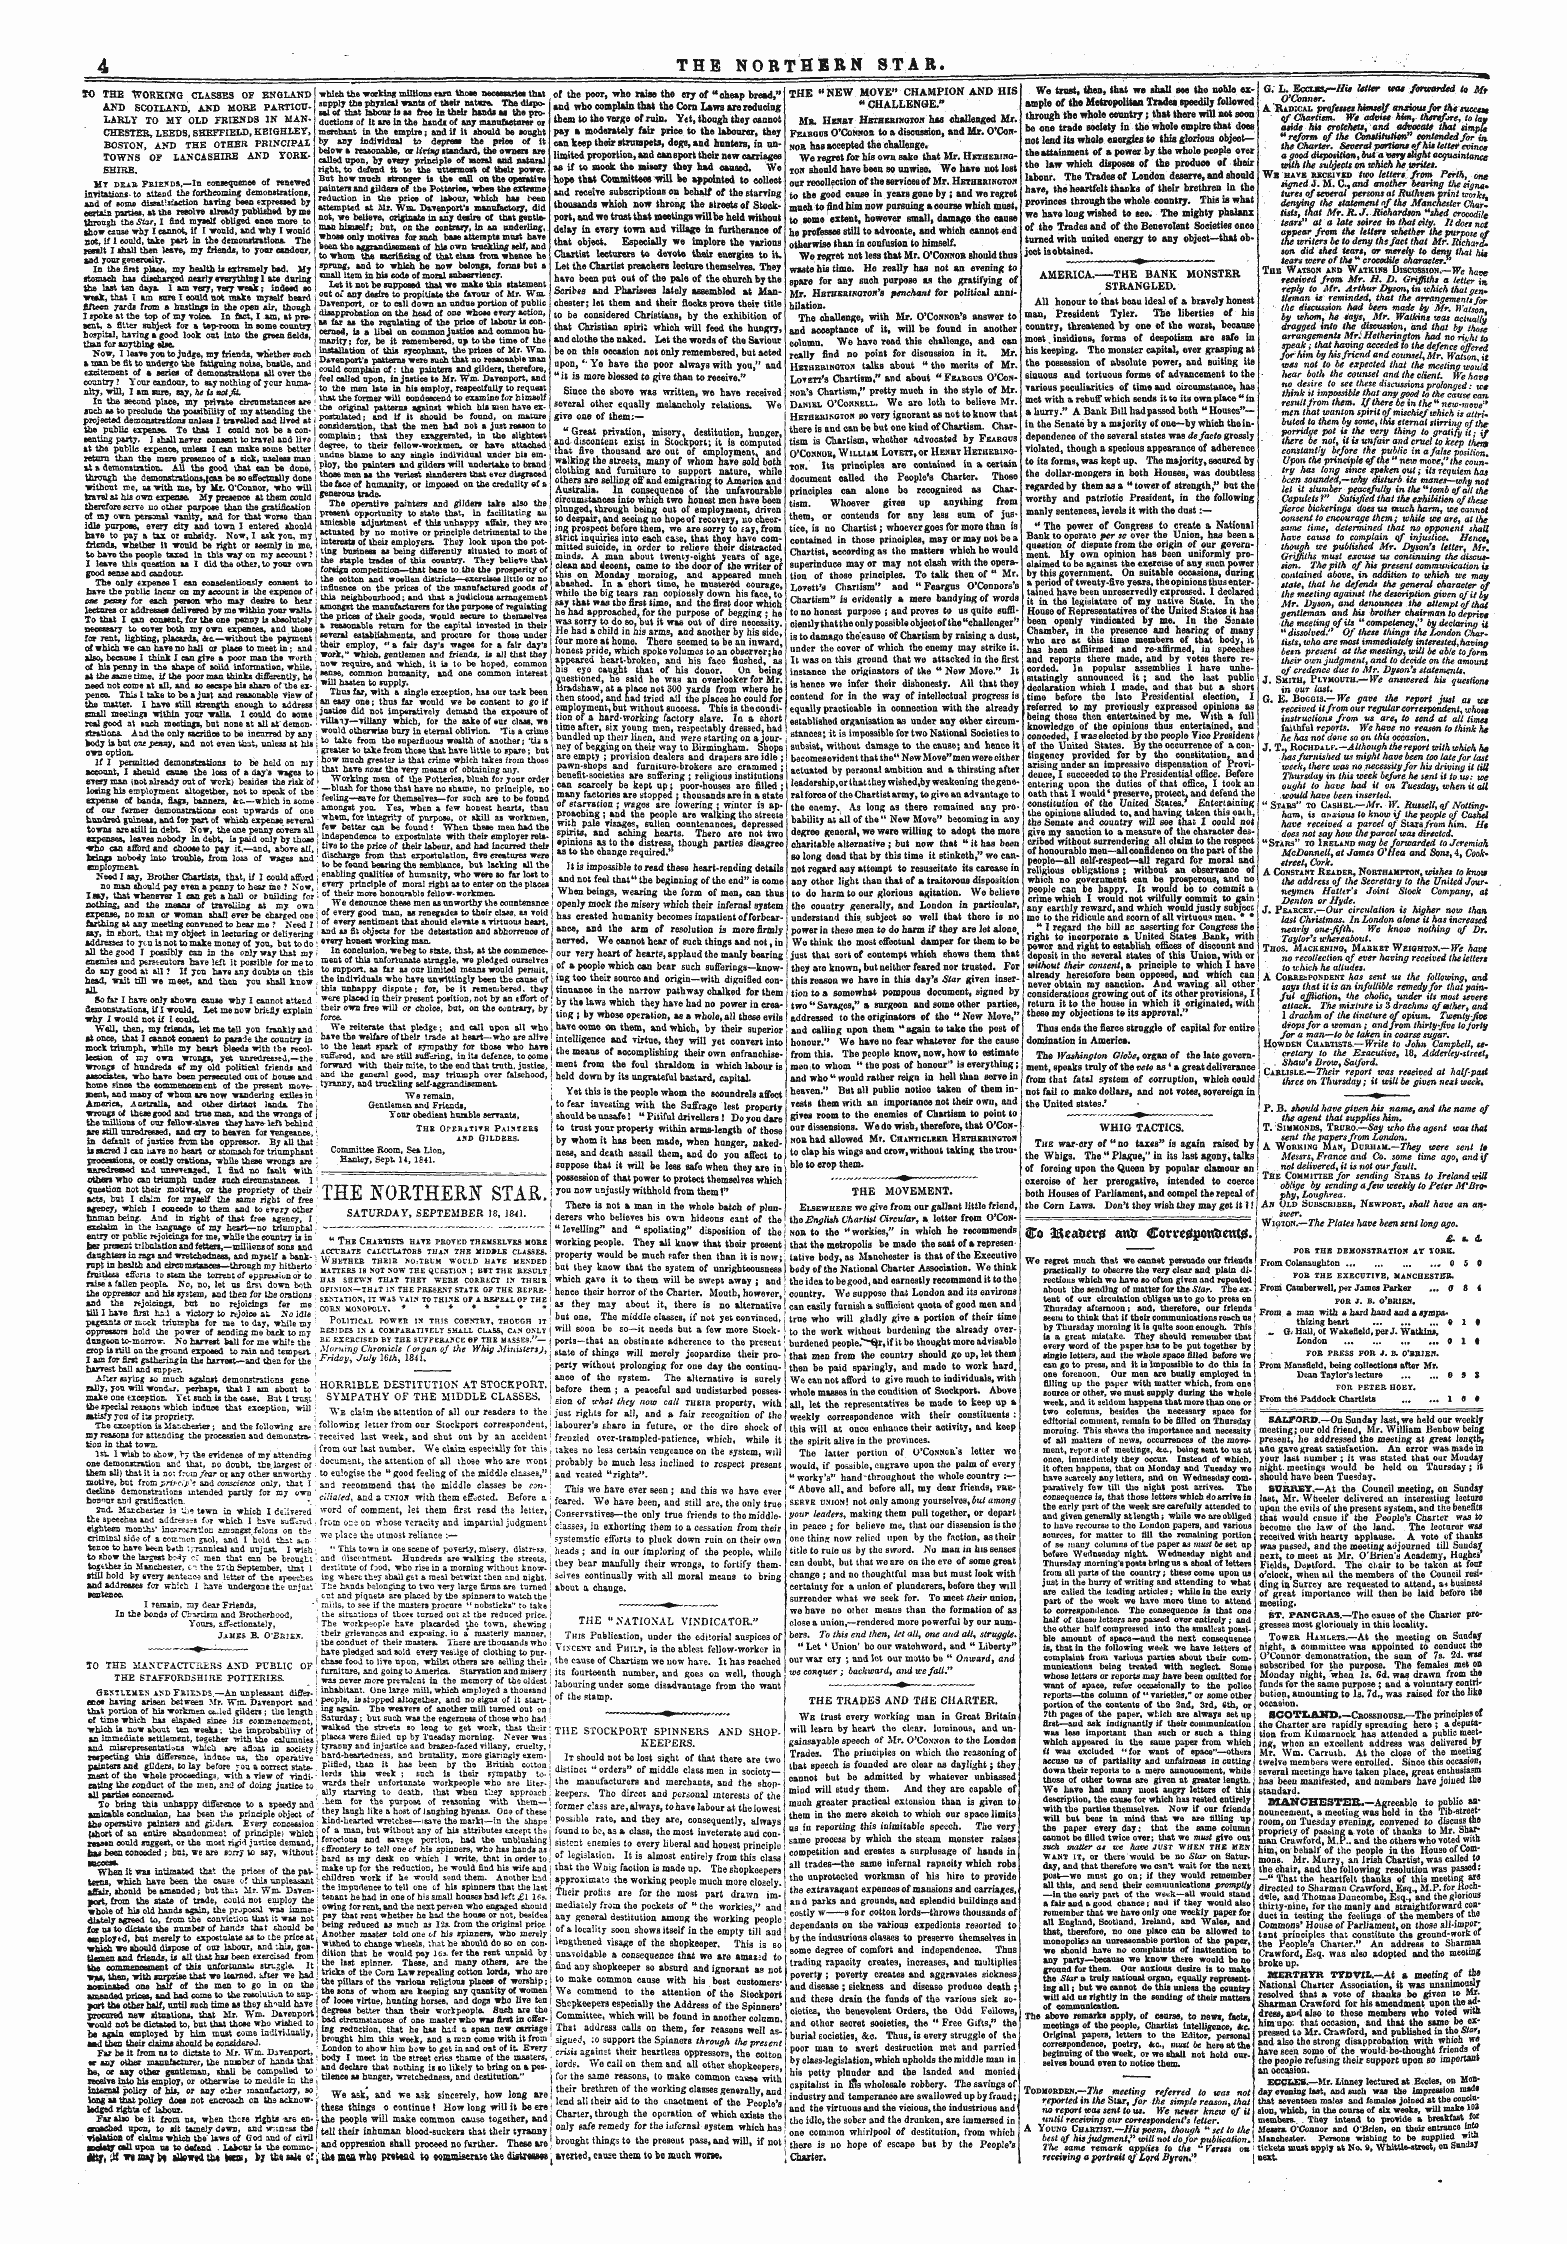 Northern Star (1837-1852): jS F Y, 4th edition - The Northern Star Saturday. September 18. 1841.